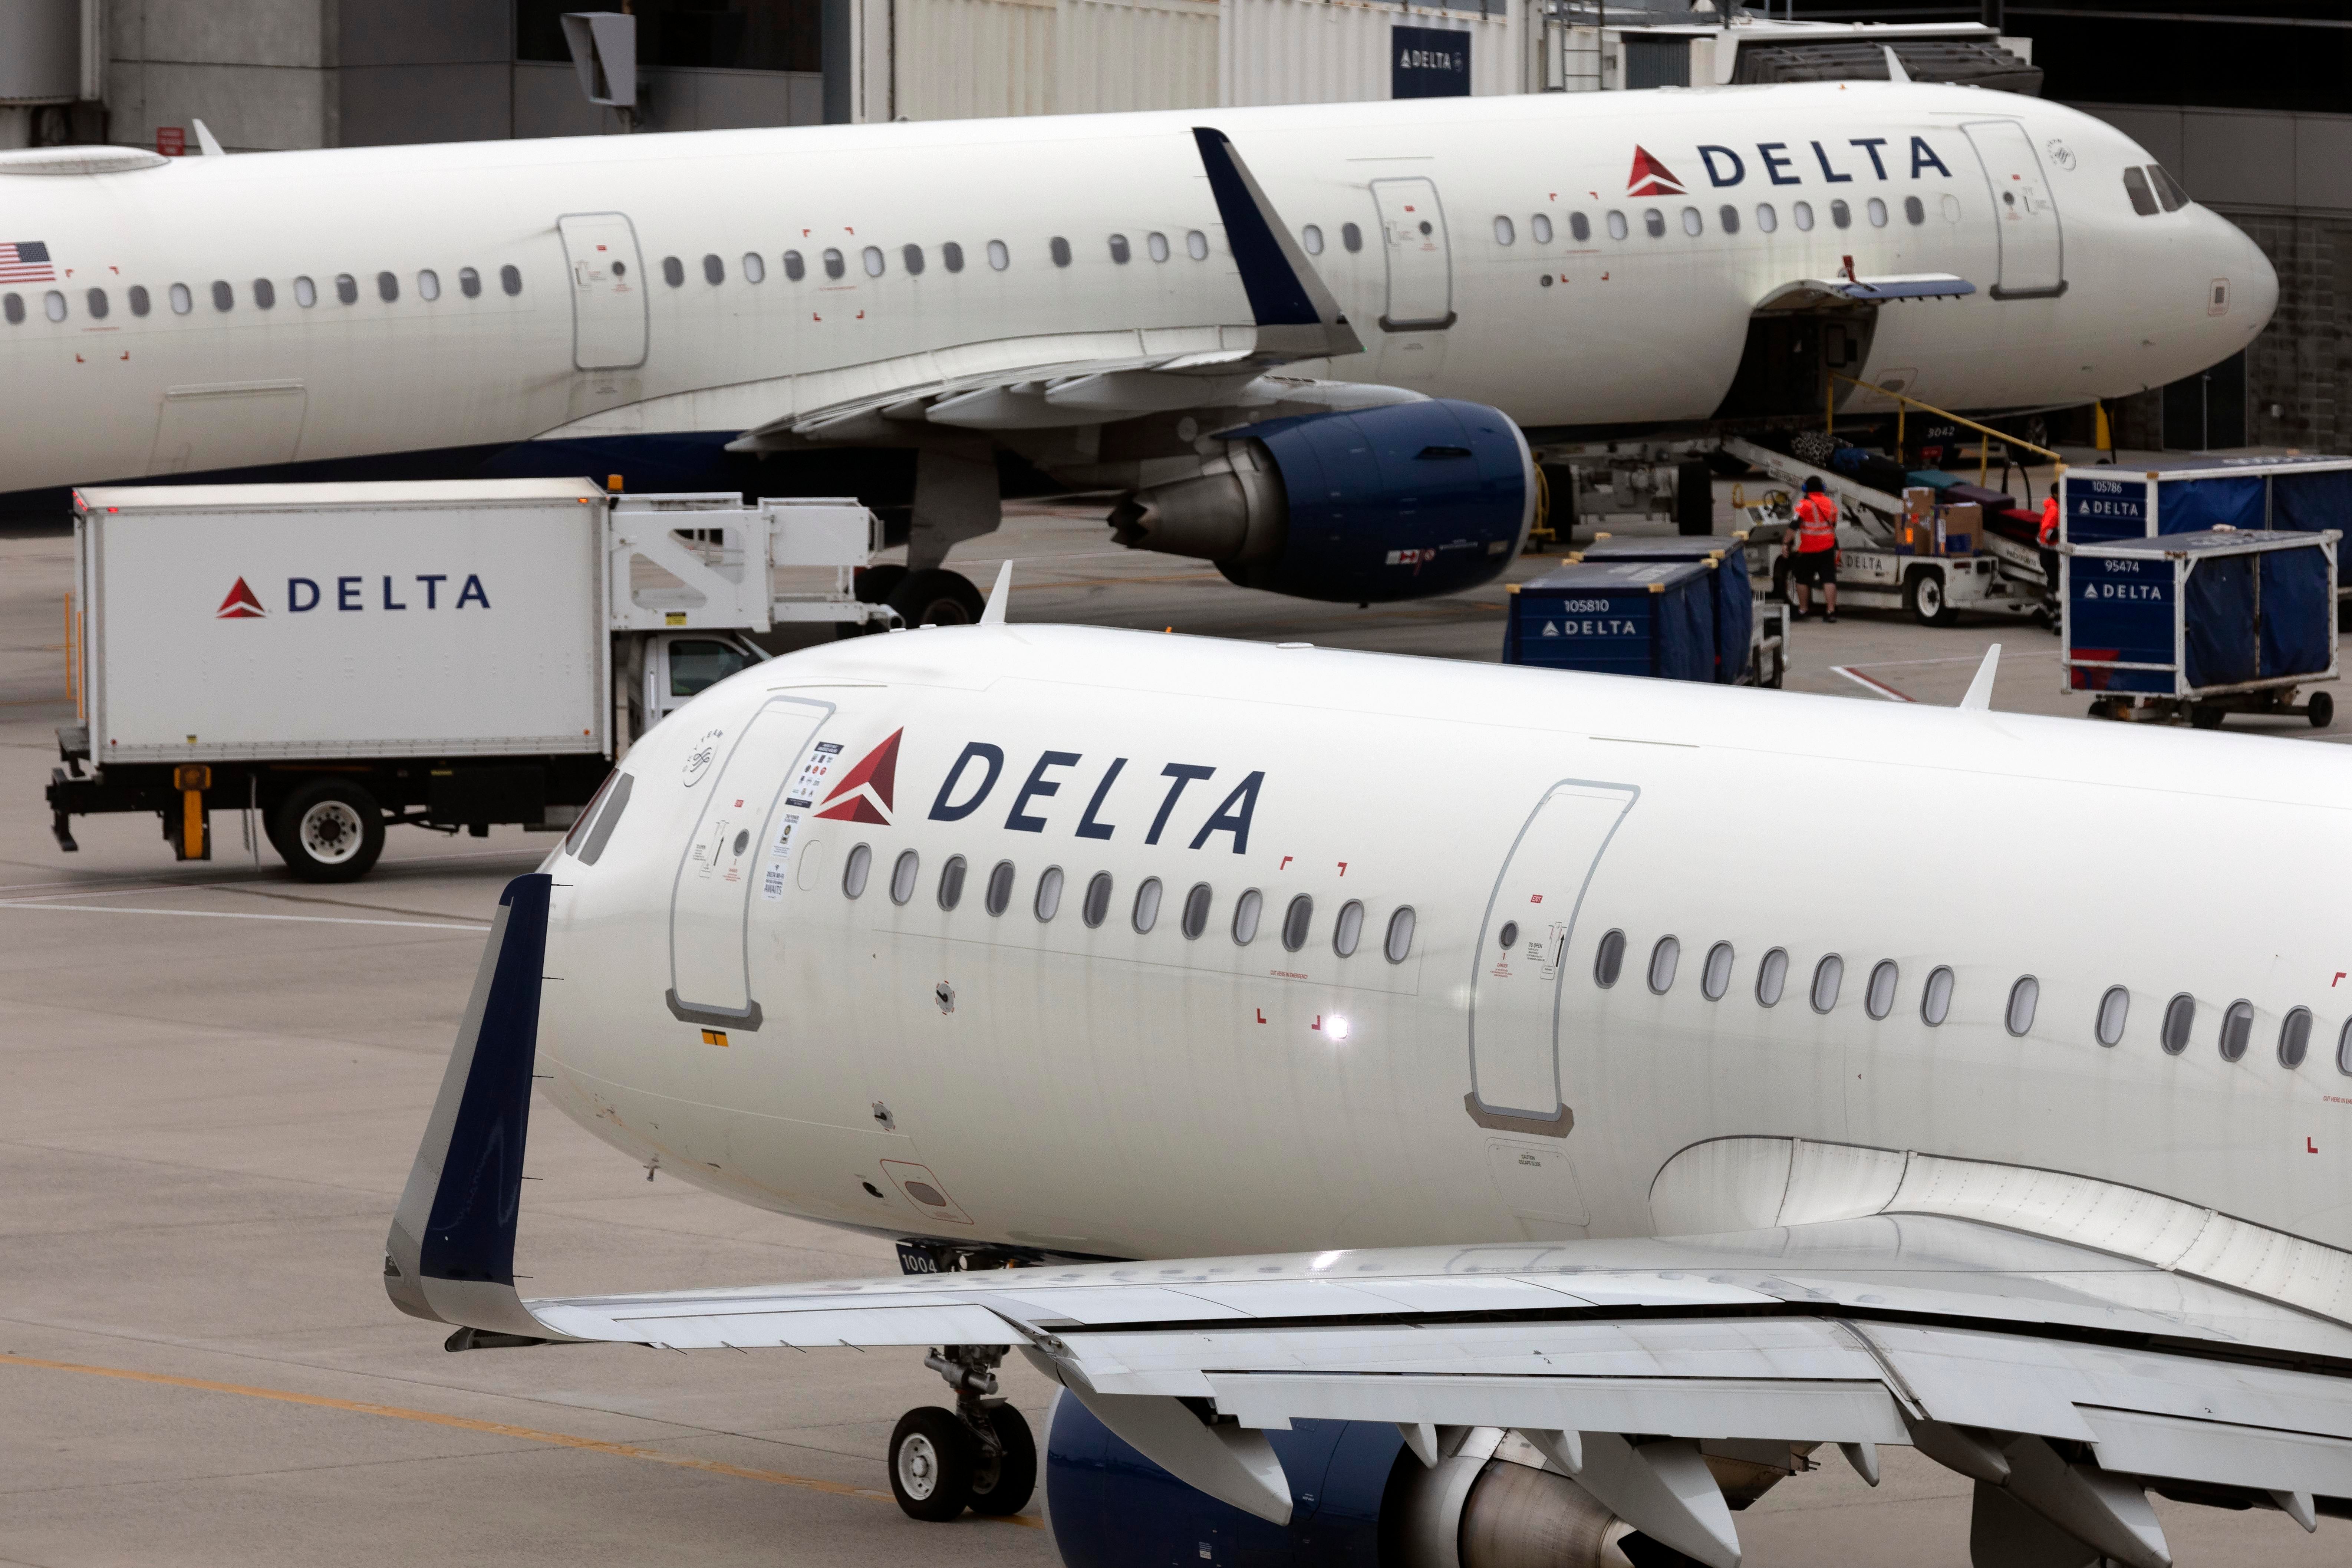 Delta Air Lines became the fourth major US airline to have found ‘a small number’ of components supplied by AOG Technics on its planes